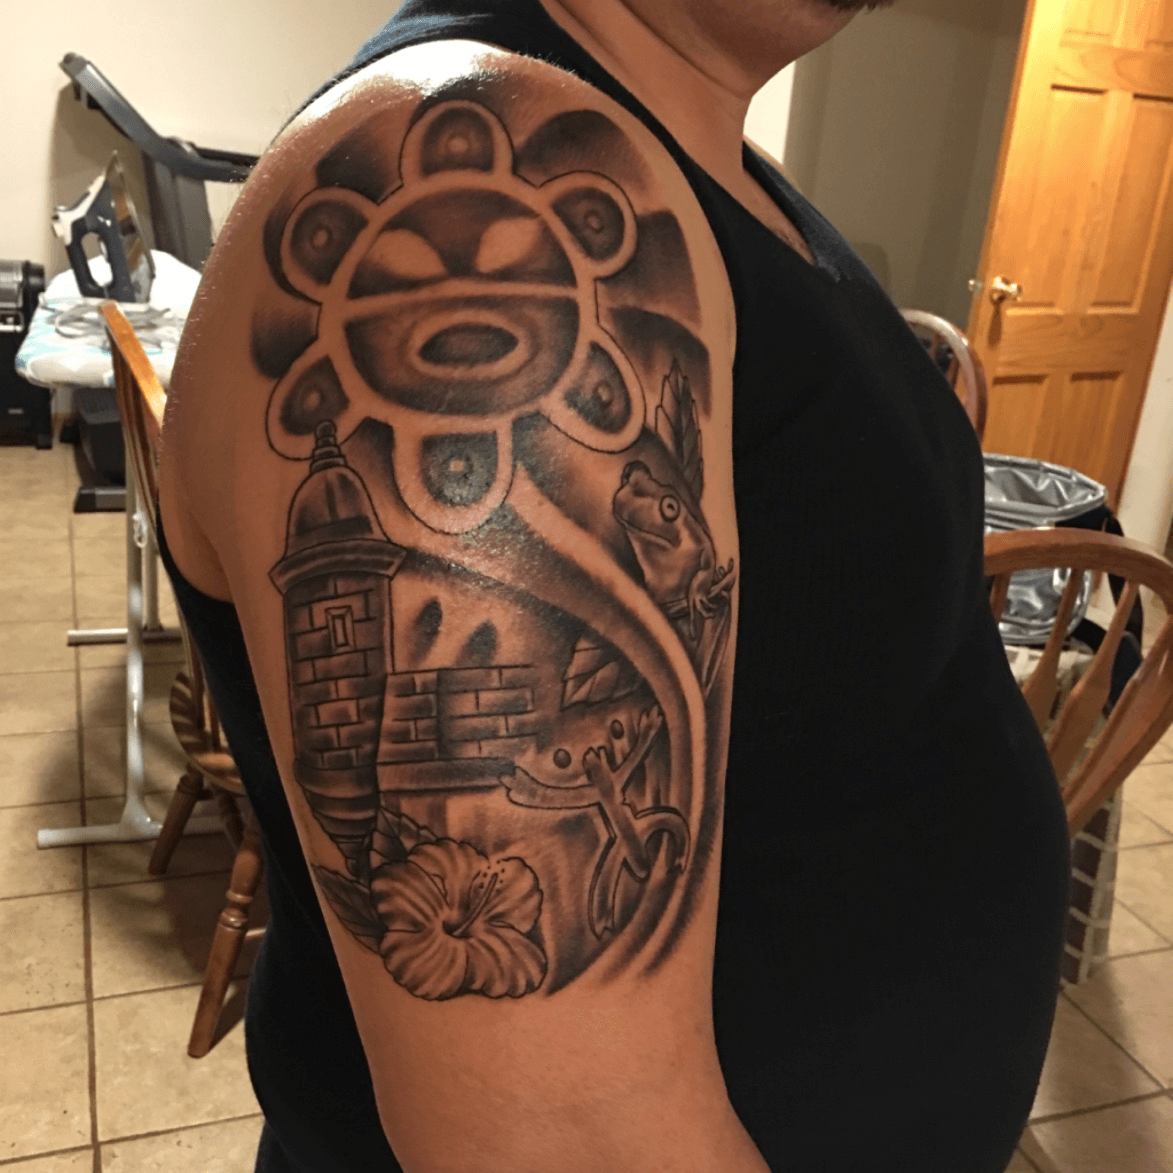 Recovery Aftercare on X Puerto Rican themed sleeve done by Gian Karle  Insta giankarle with Recovery Aftercare Check out his profile for more  details recoveryaftercare tattooaftercare tattoo colortattoo  sleevetattoo puertorico 